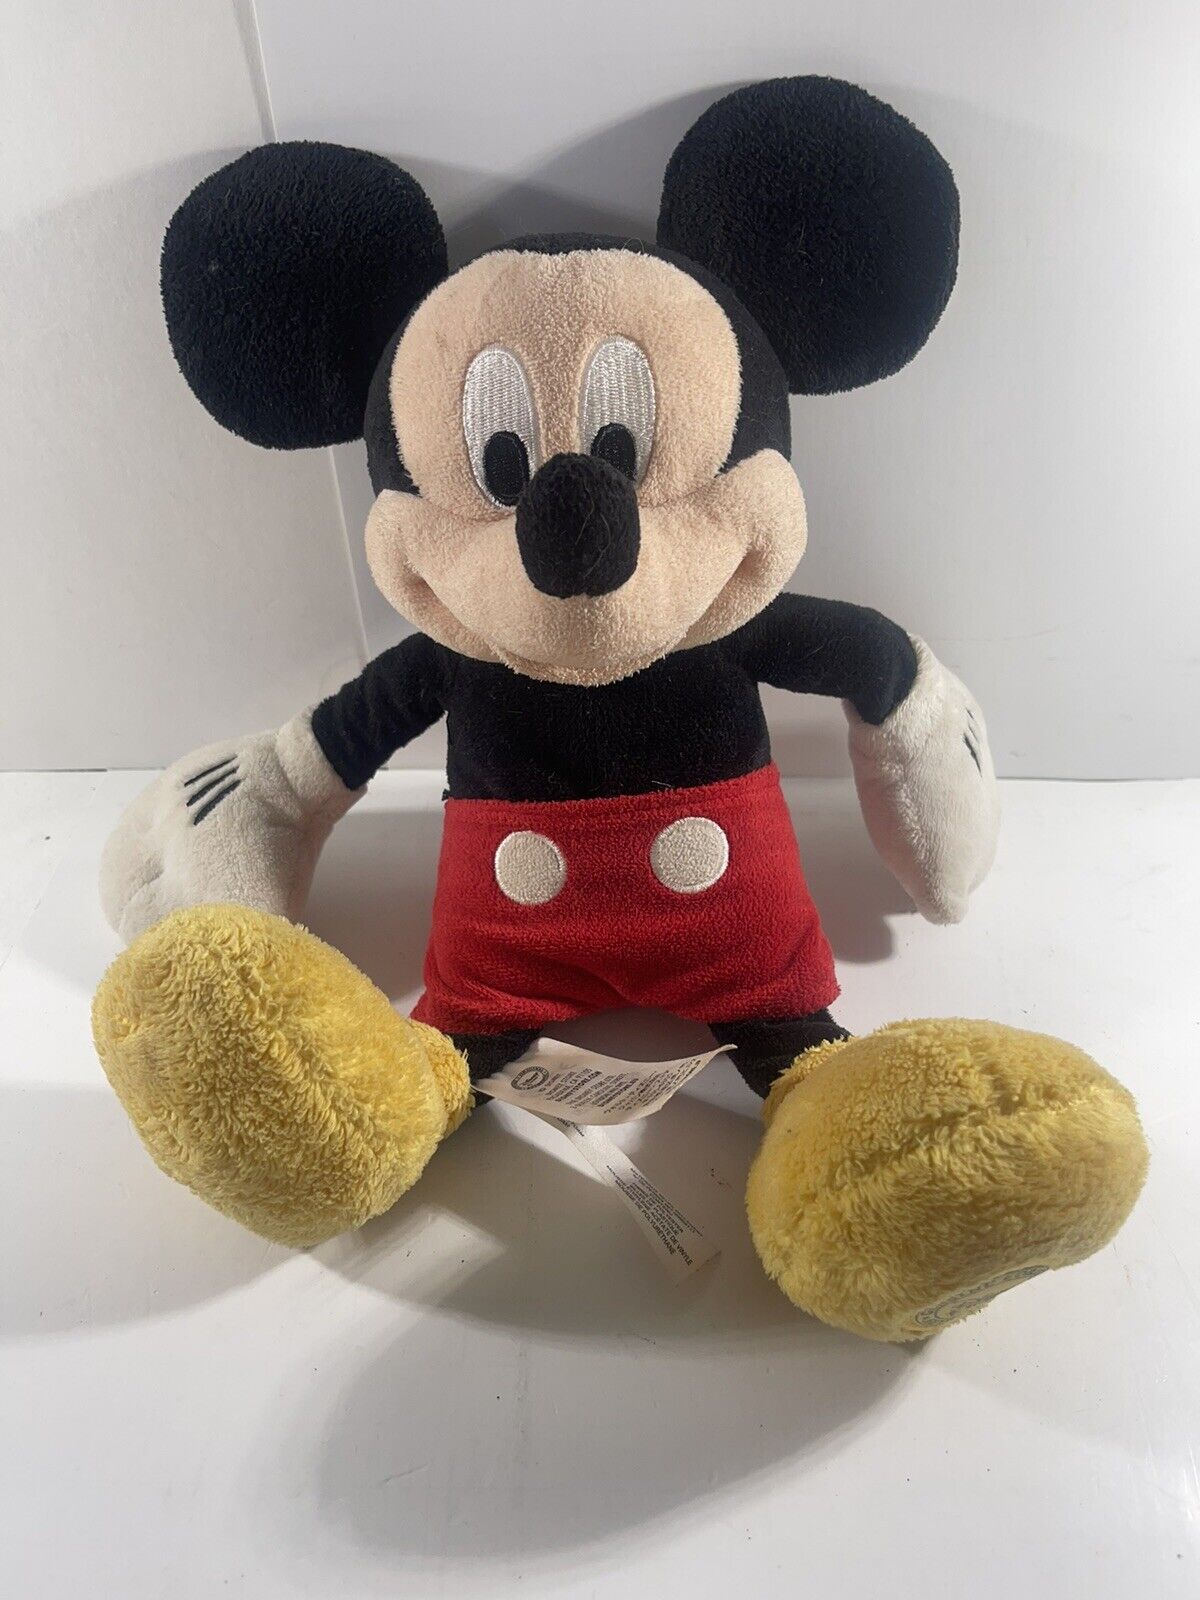 MICKEY MOUSE Disney Store Plush Toy Stuffed Animal Authentic pre-owned